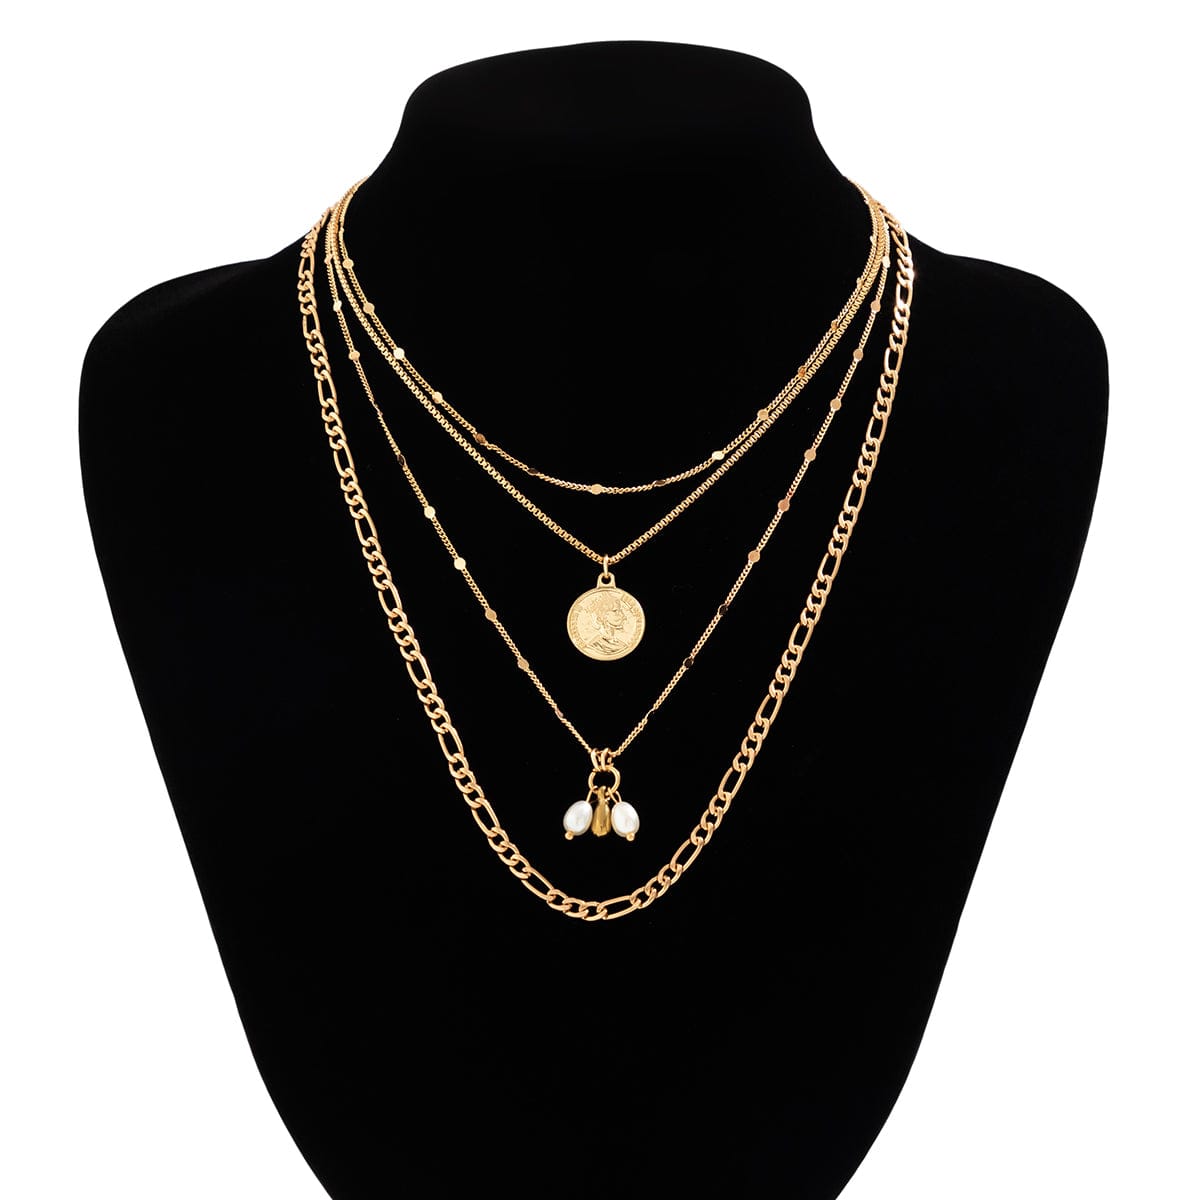 Trendy Layered Pattern Round Disk Pearl Pendant Curb Chain Necklace Set - ArtGalleryZen